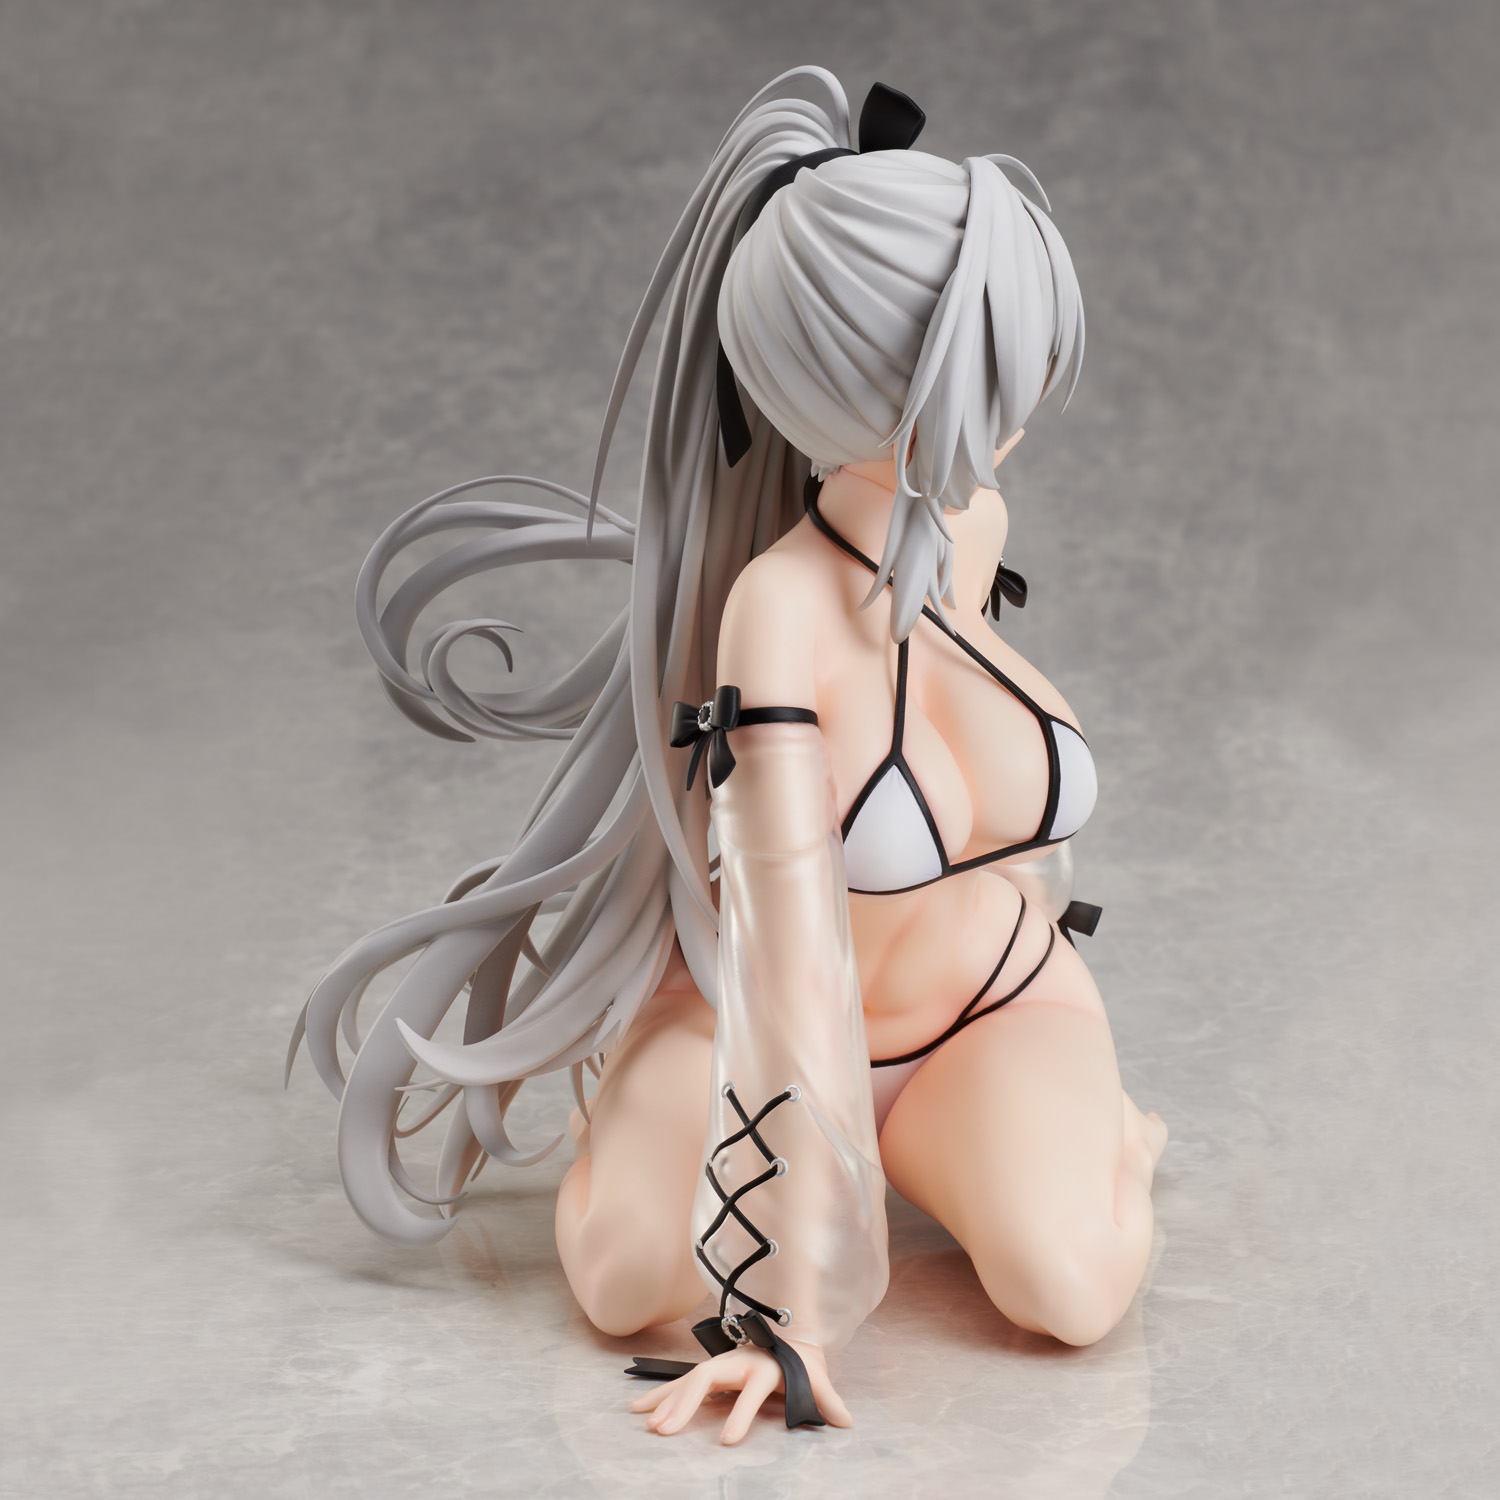 azur-lane-drake-14-scale-figure-the-golden-hinds-respite-ver image count 4